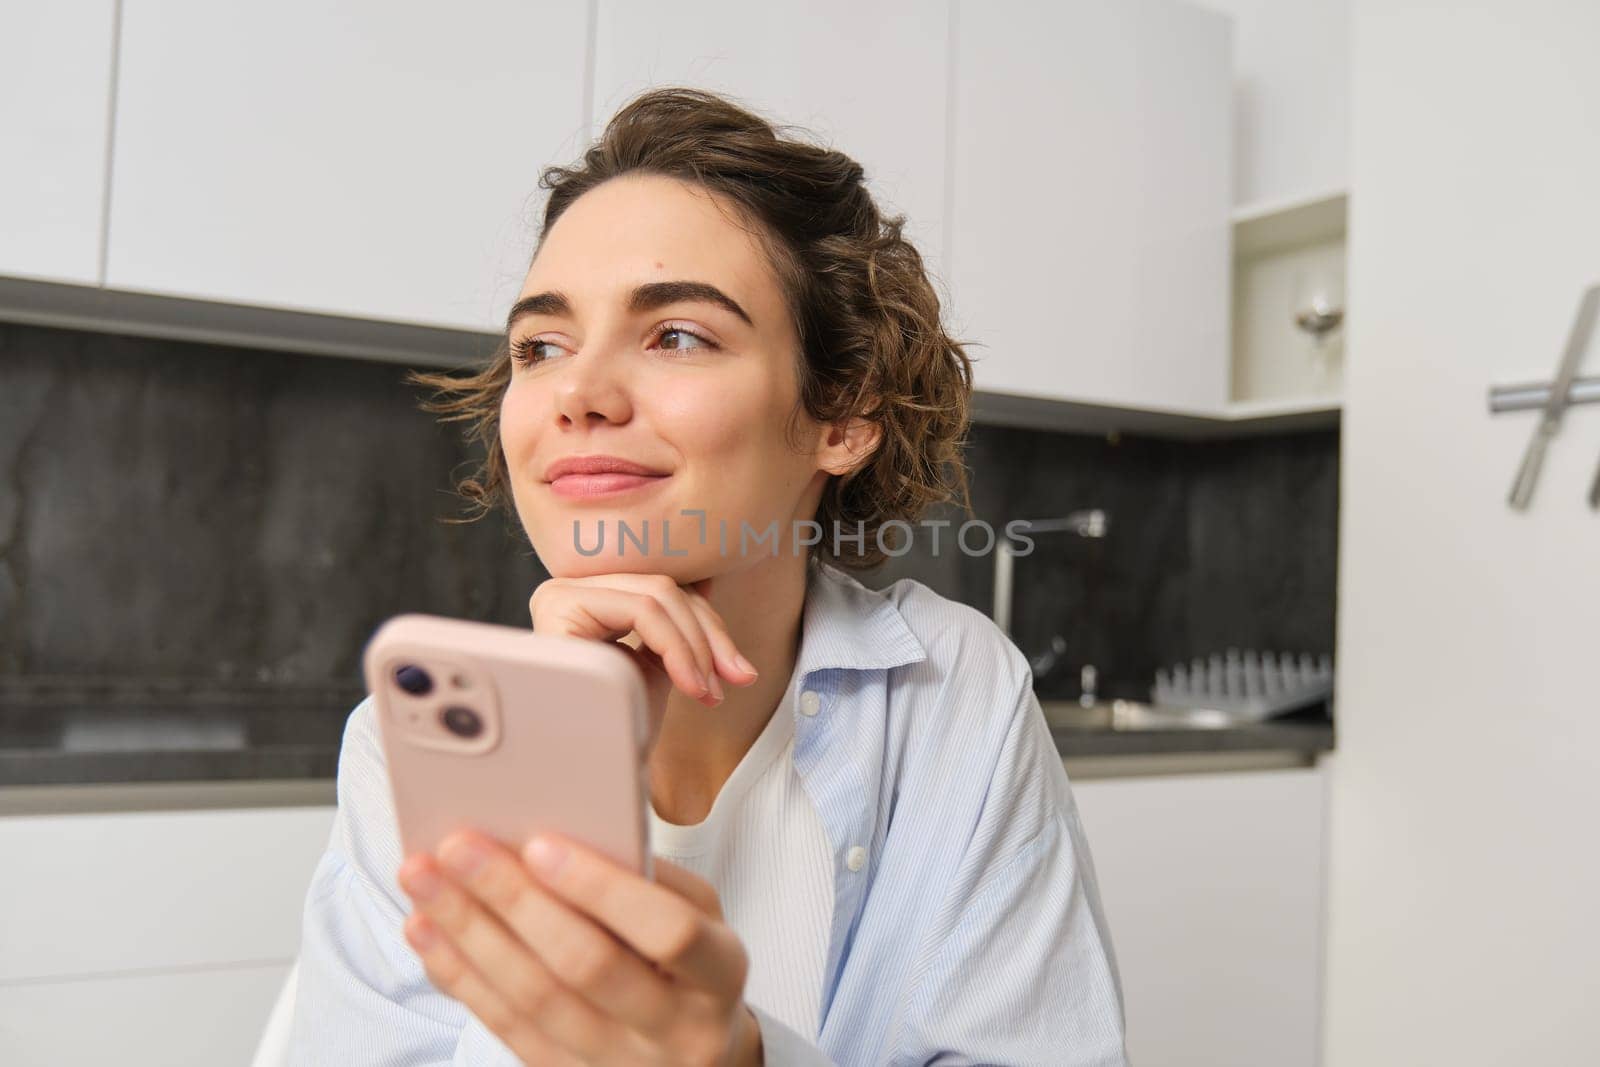 Portrait of beautiful woman at home, holding smartphone, online shopping from mobile phone app.